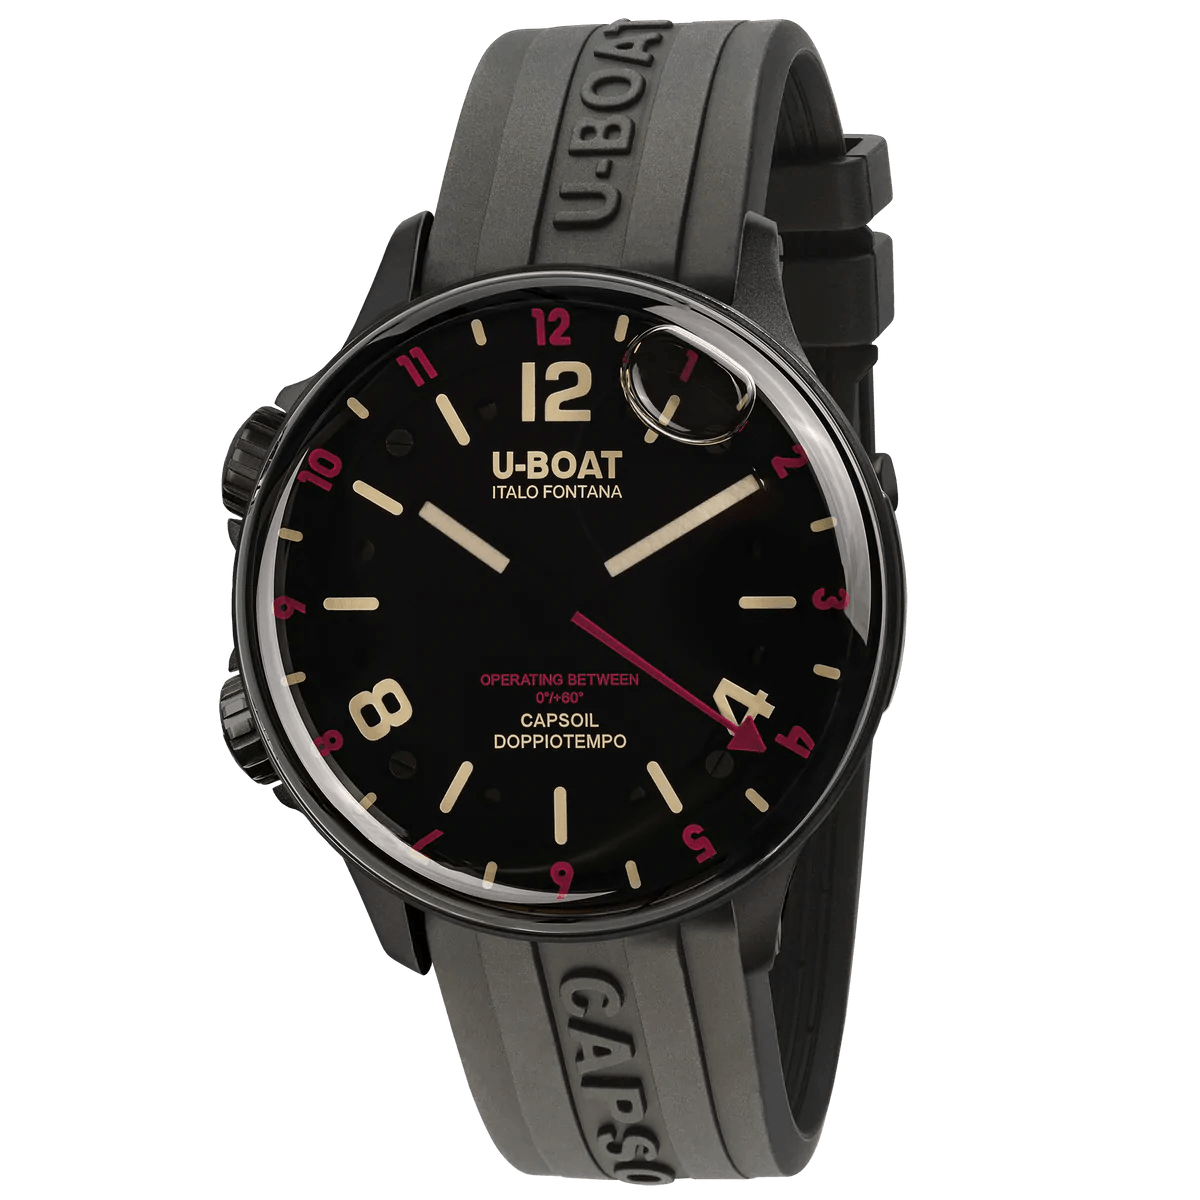 U-Boat Doppiotempo 45 DLC Red Rehaut 8841/A - Watches & Crystals